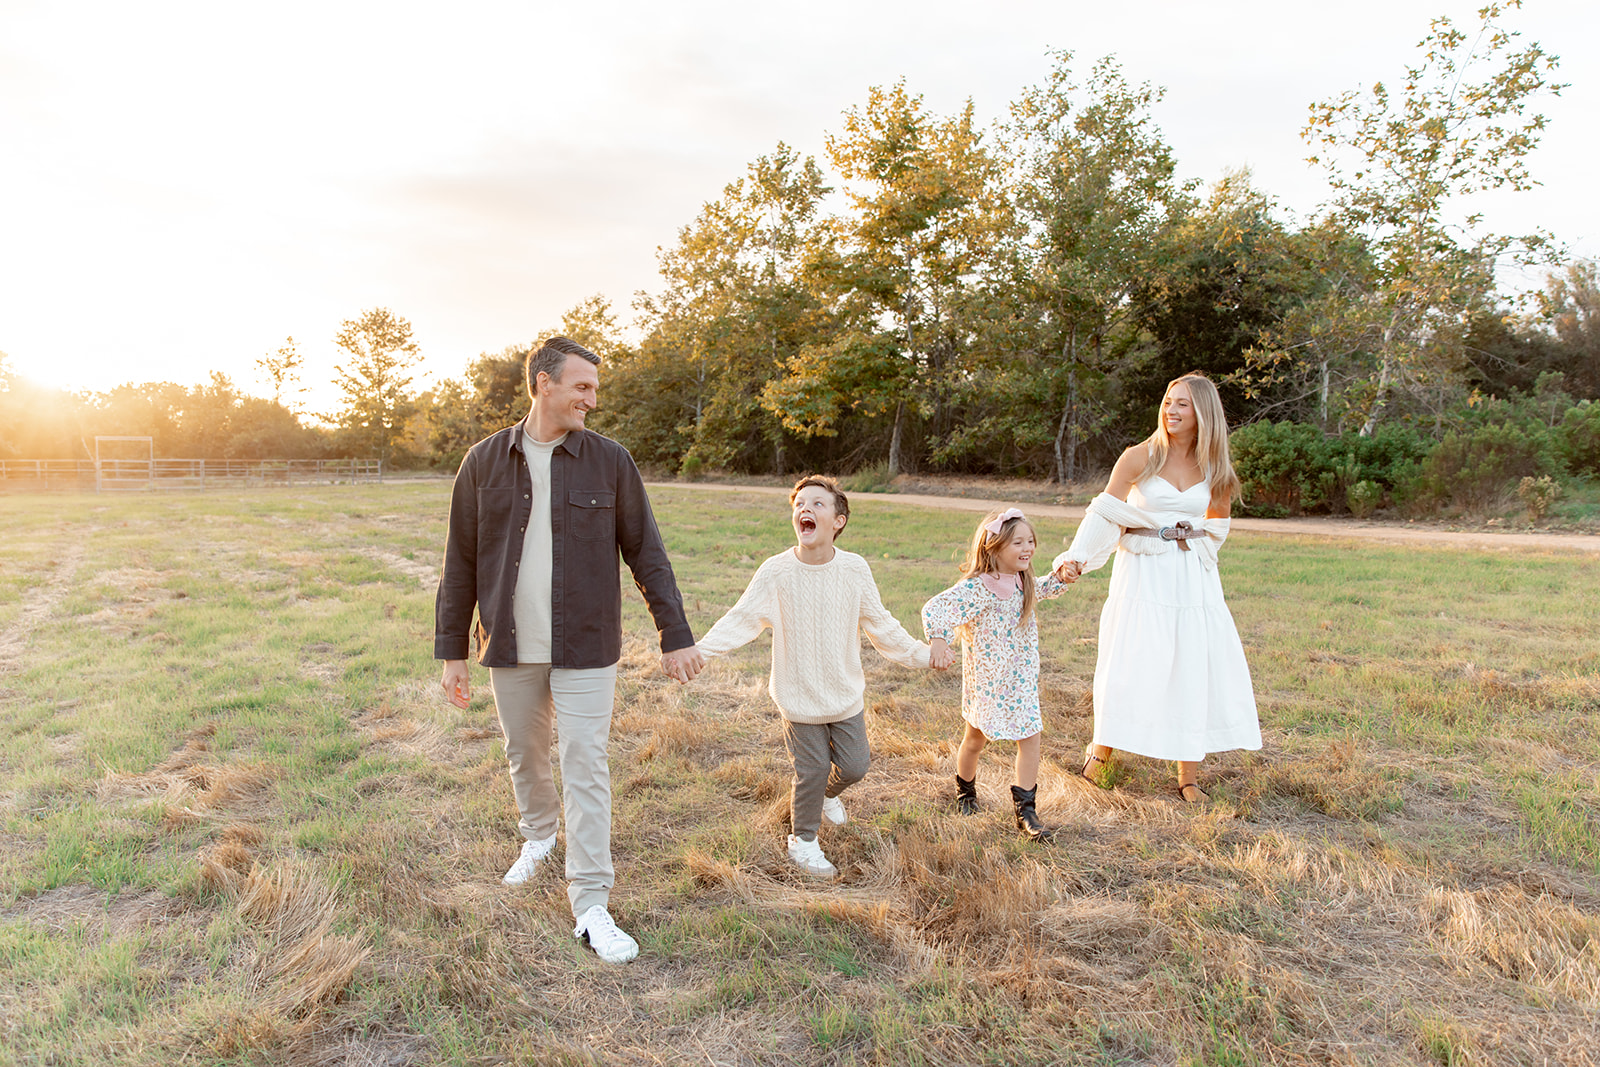 A mom and dad walk through a grassy field holding hands with their smiling son and daughter at sunset after mommy and me classes in san diego